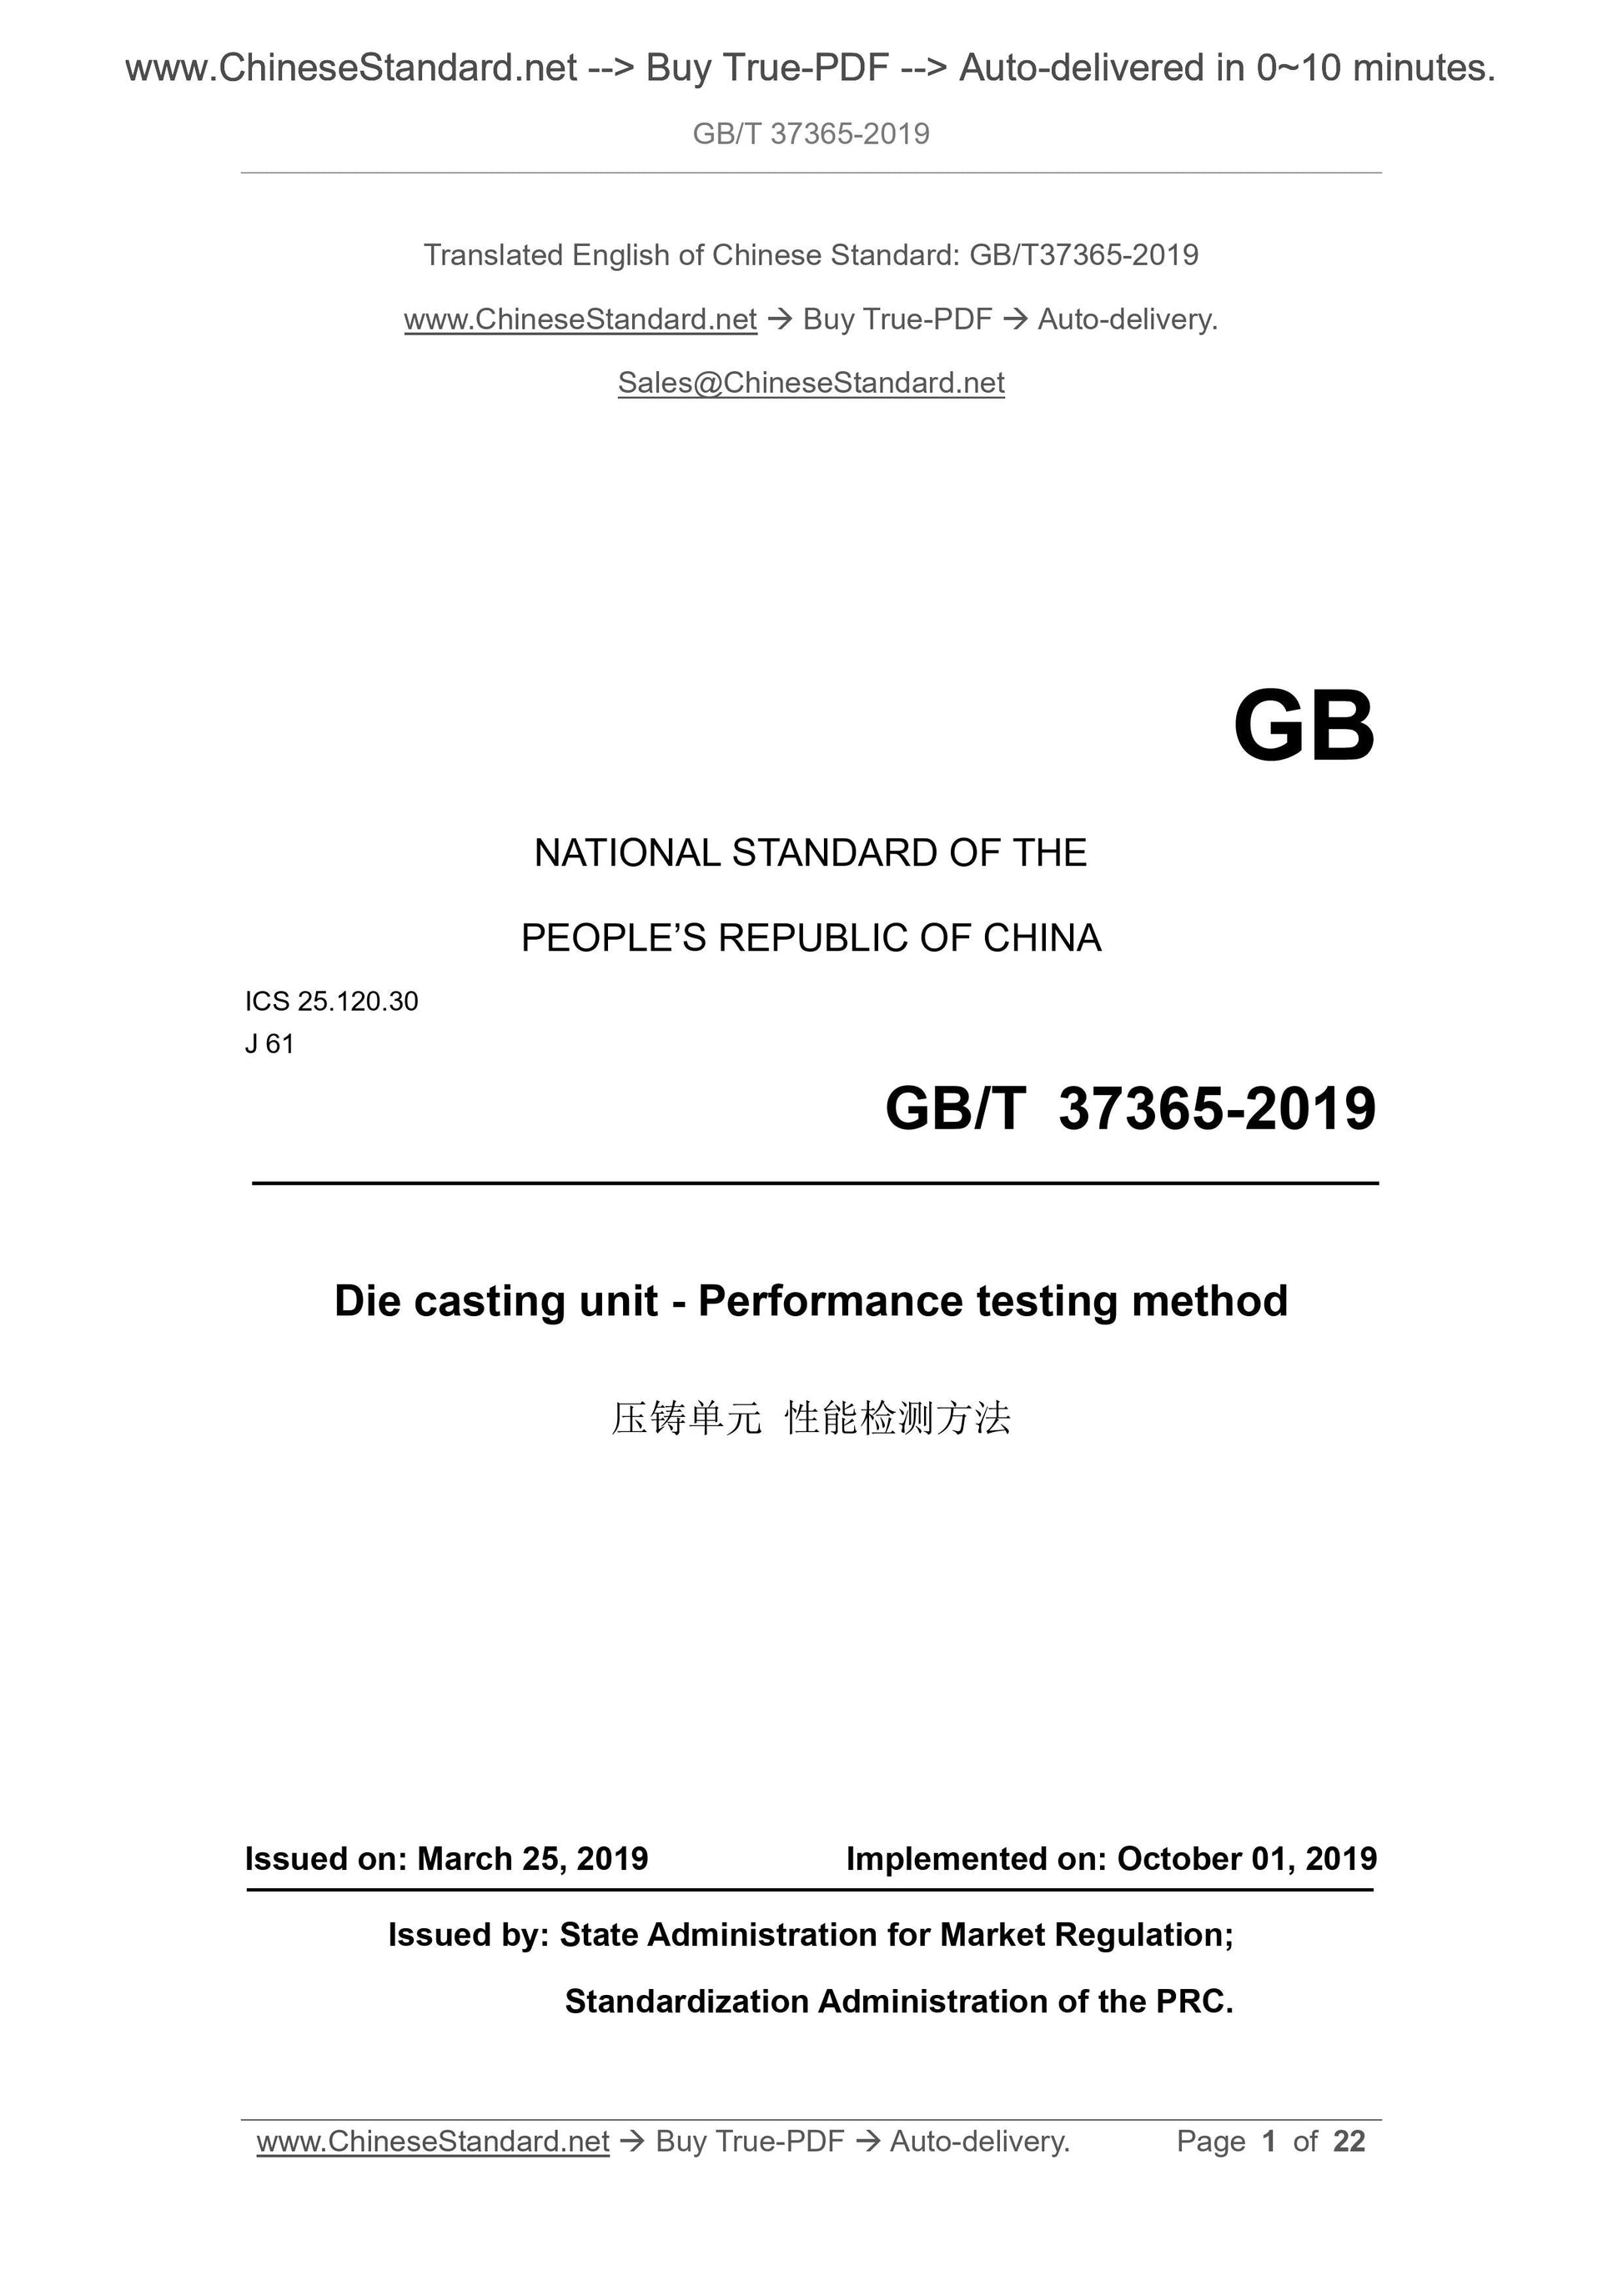 GB/T 37365-2019 Page 1